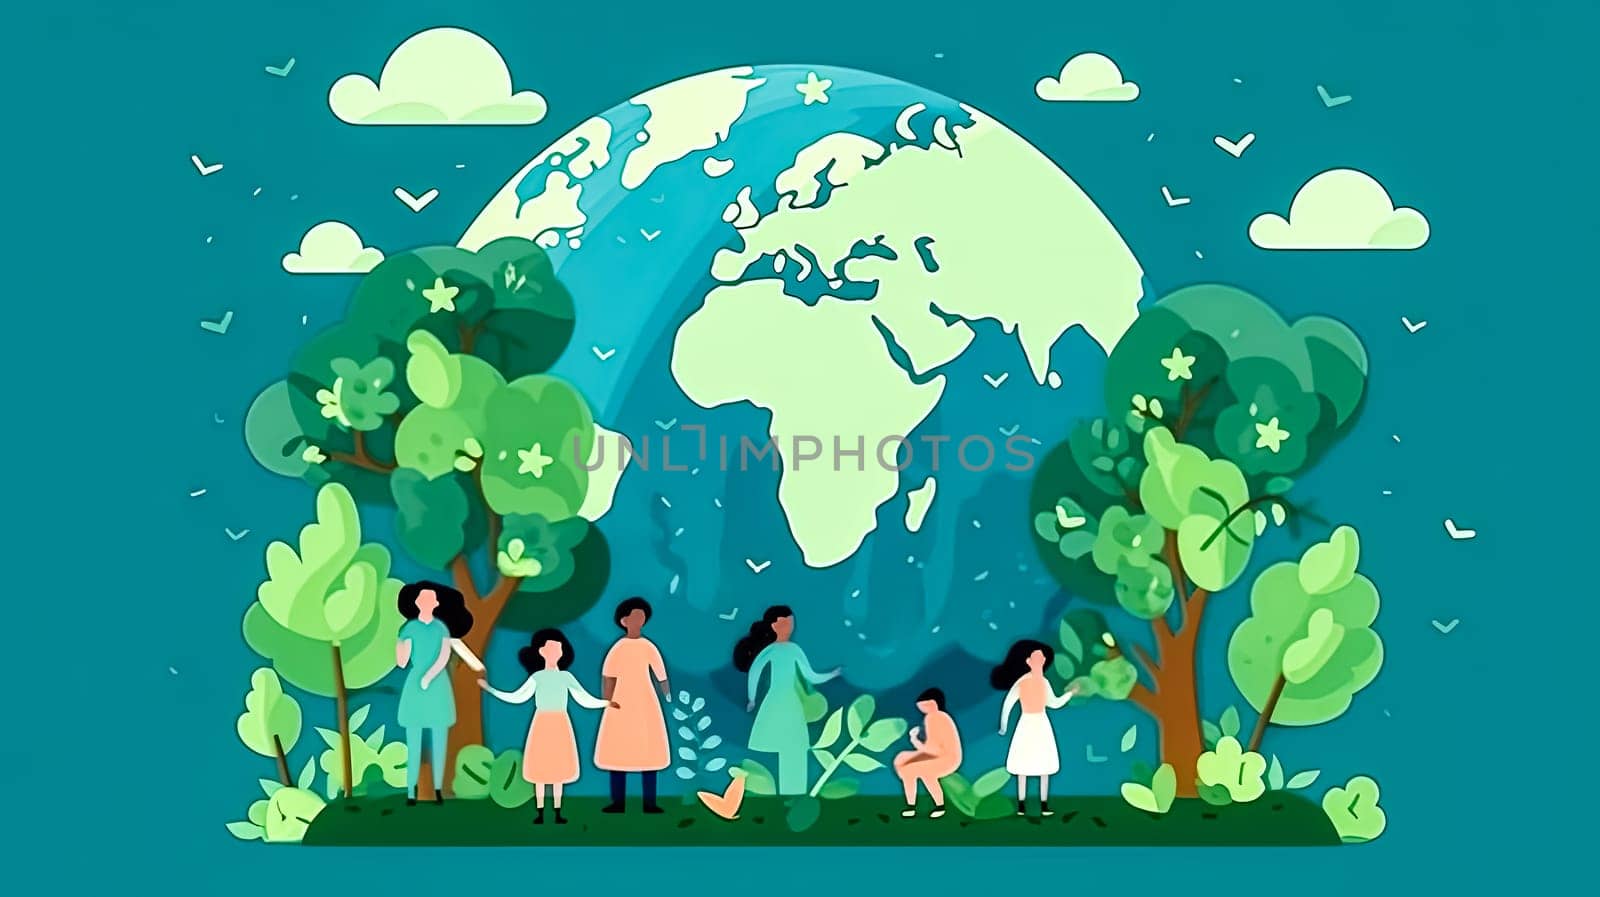 Earths stewards, A diverse group against lush greenery a visual ode to collective efforts for nature conservation, a vibrant Earth Day celebration